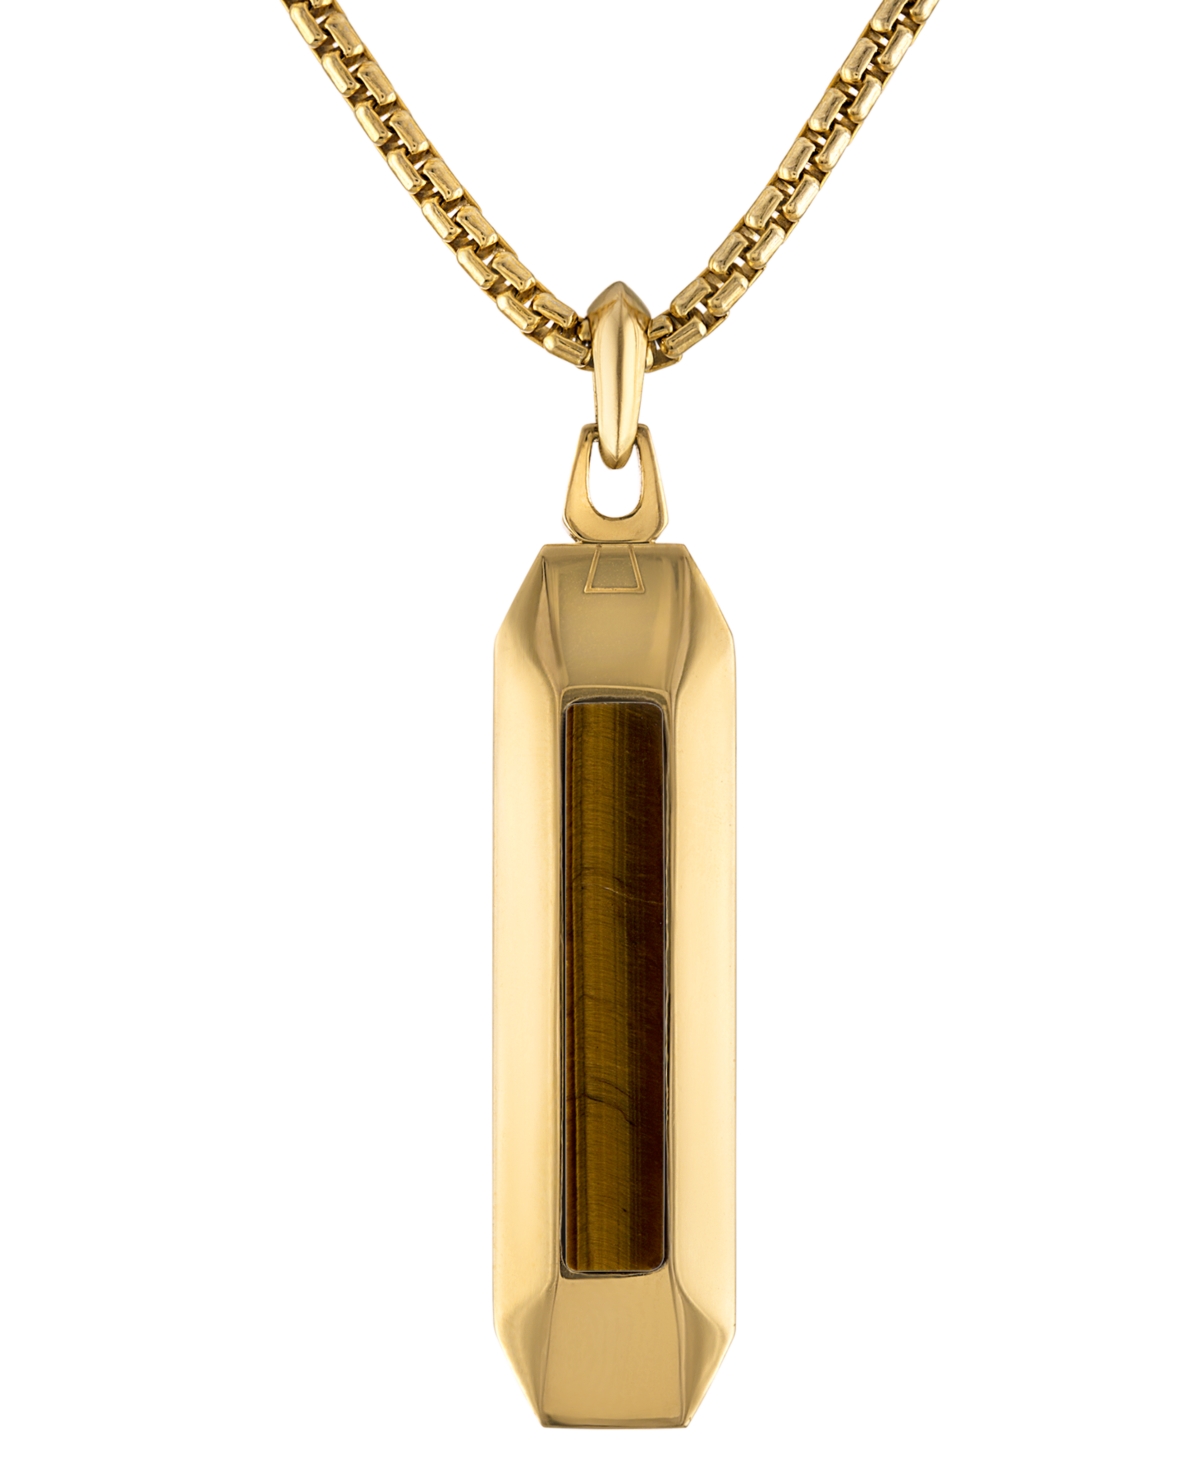 Bulova Stainless Steel Gemstone Pendant Necklace, 24" + 2" Extender In Gold Tone